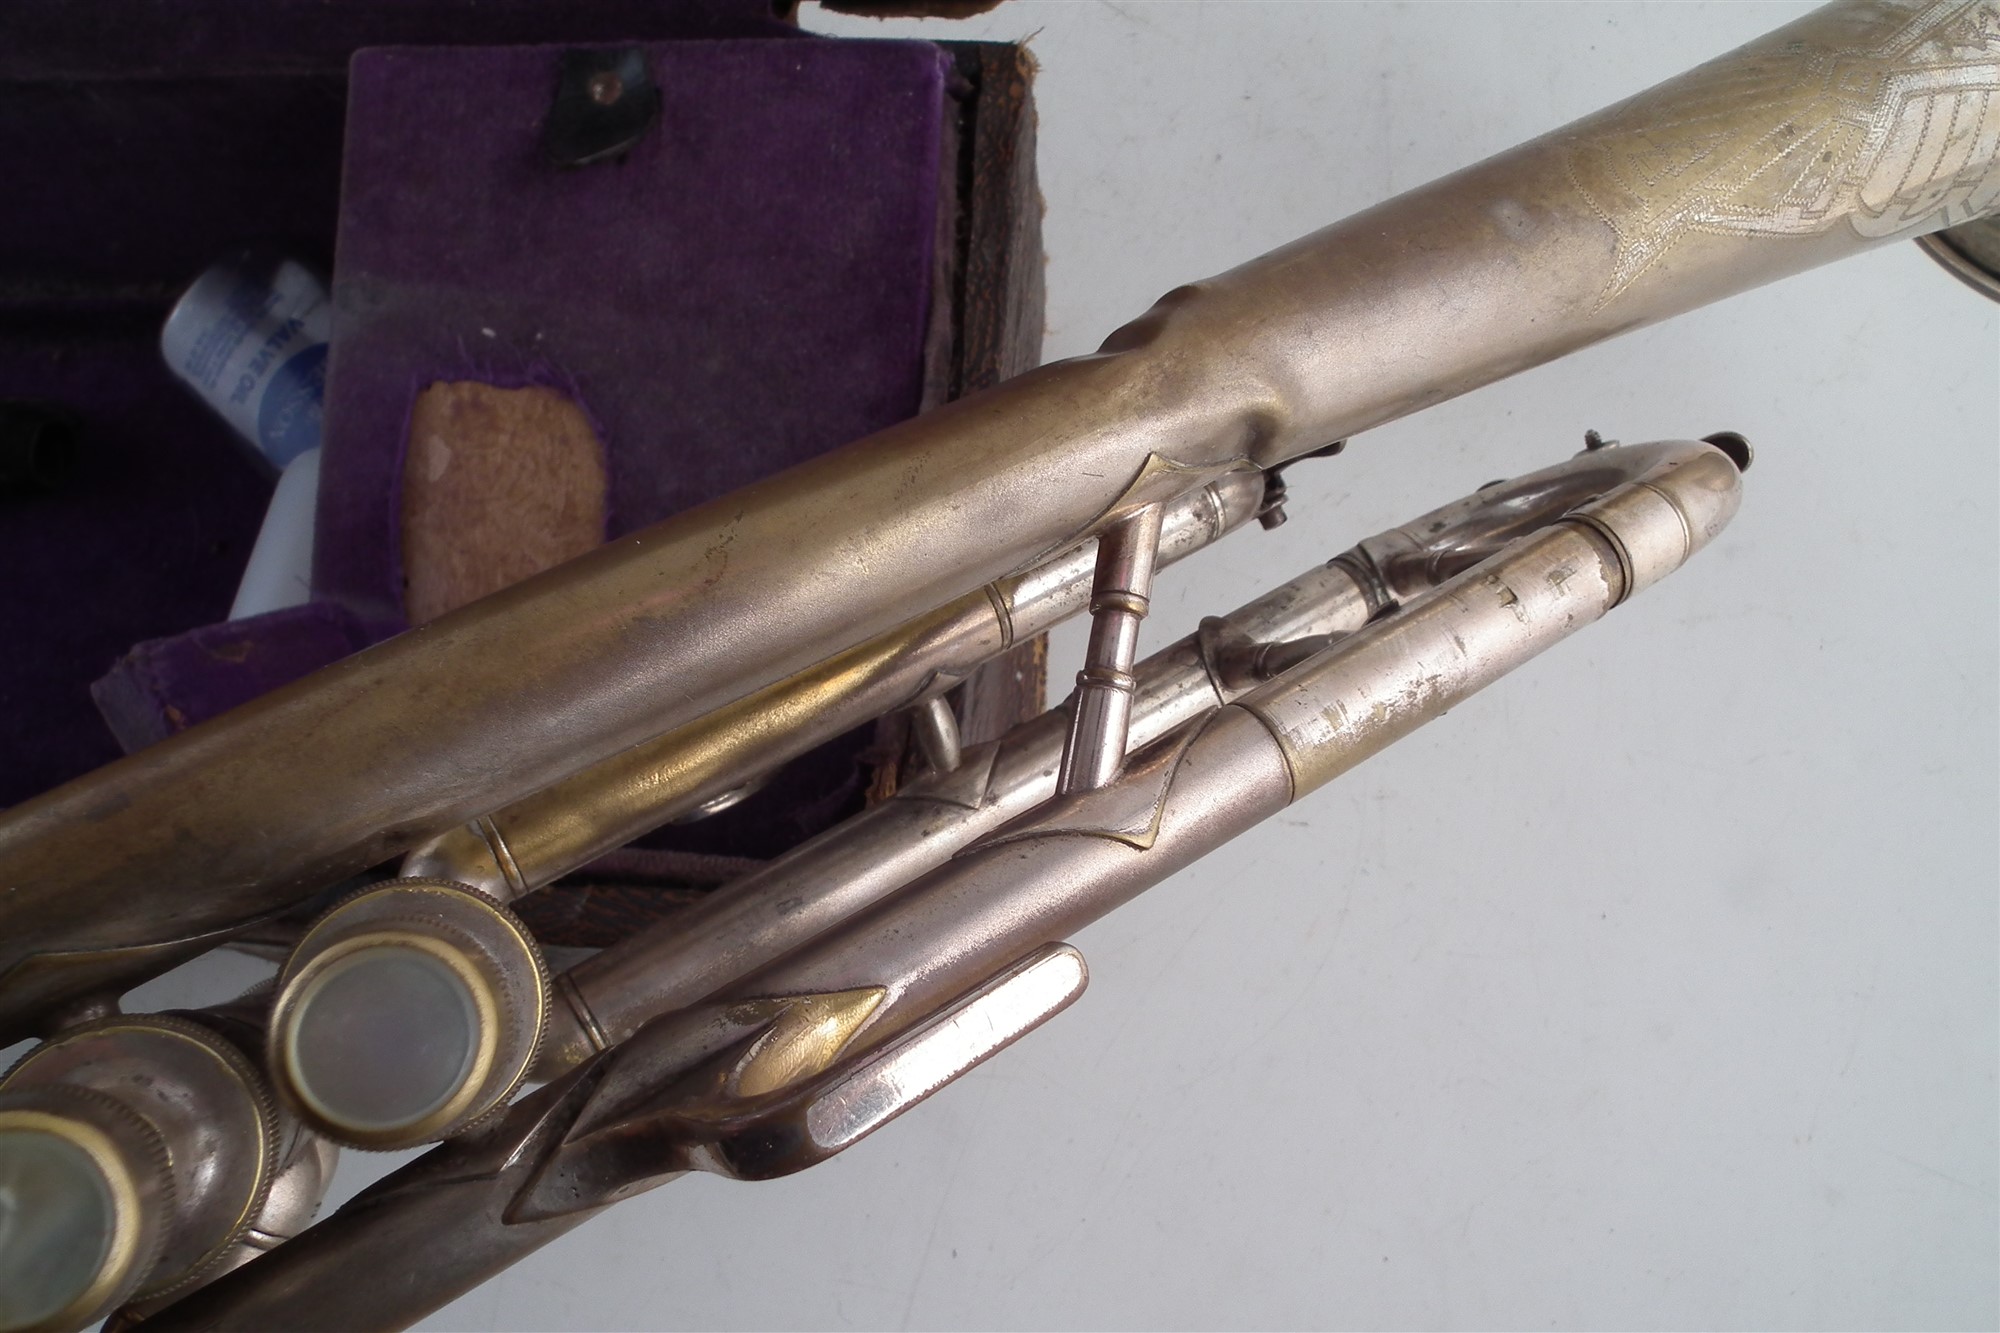 Manhattan trumpet, Danor Euphonium and a Besson Cornet all with cases. - Image 10 of 11